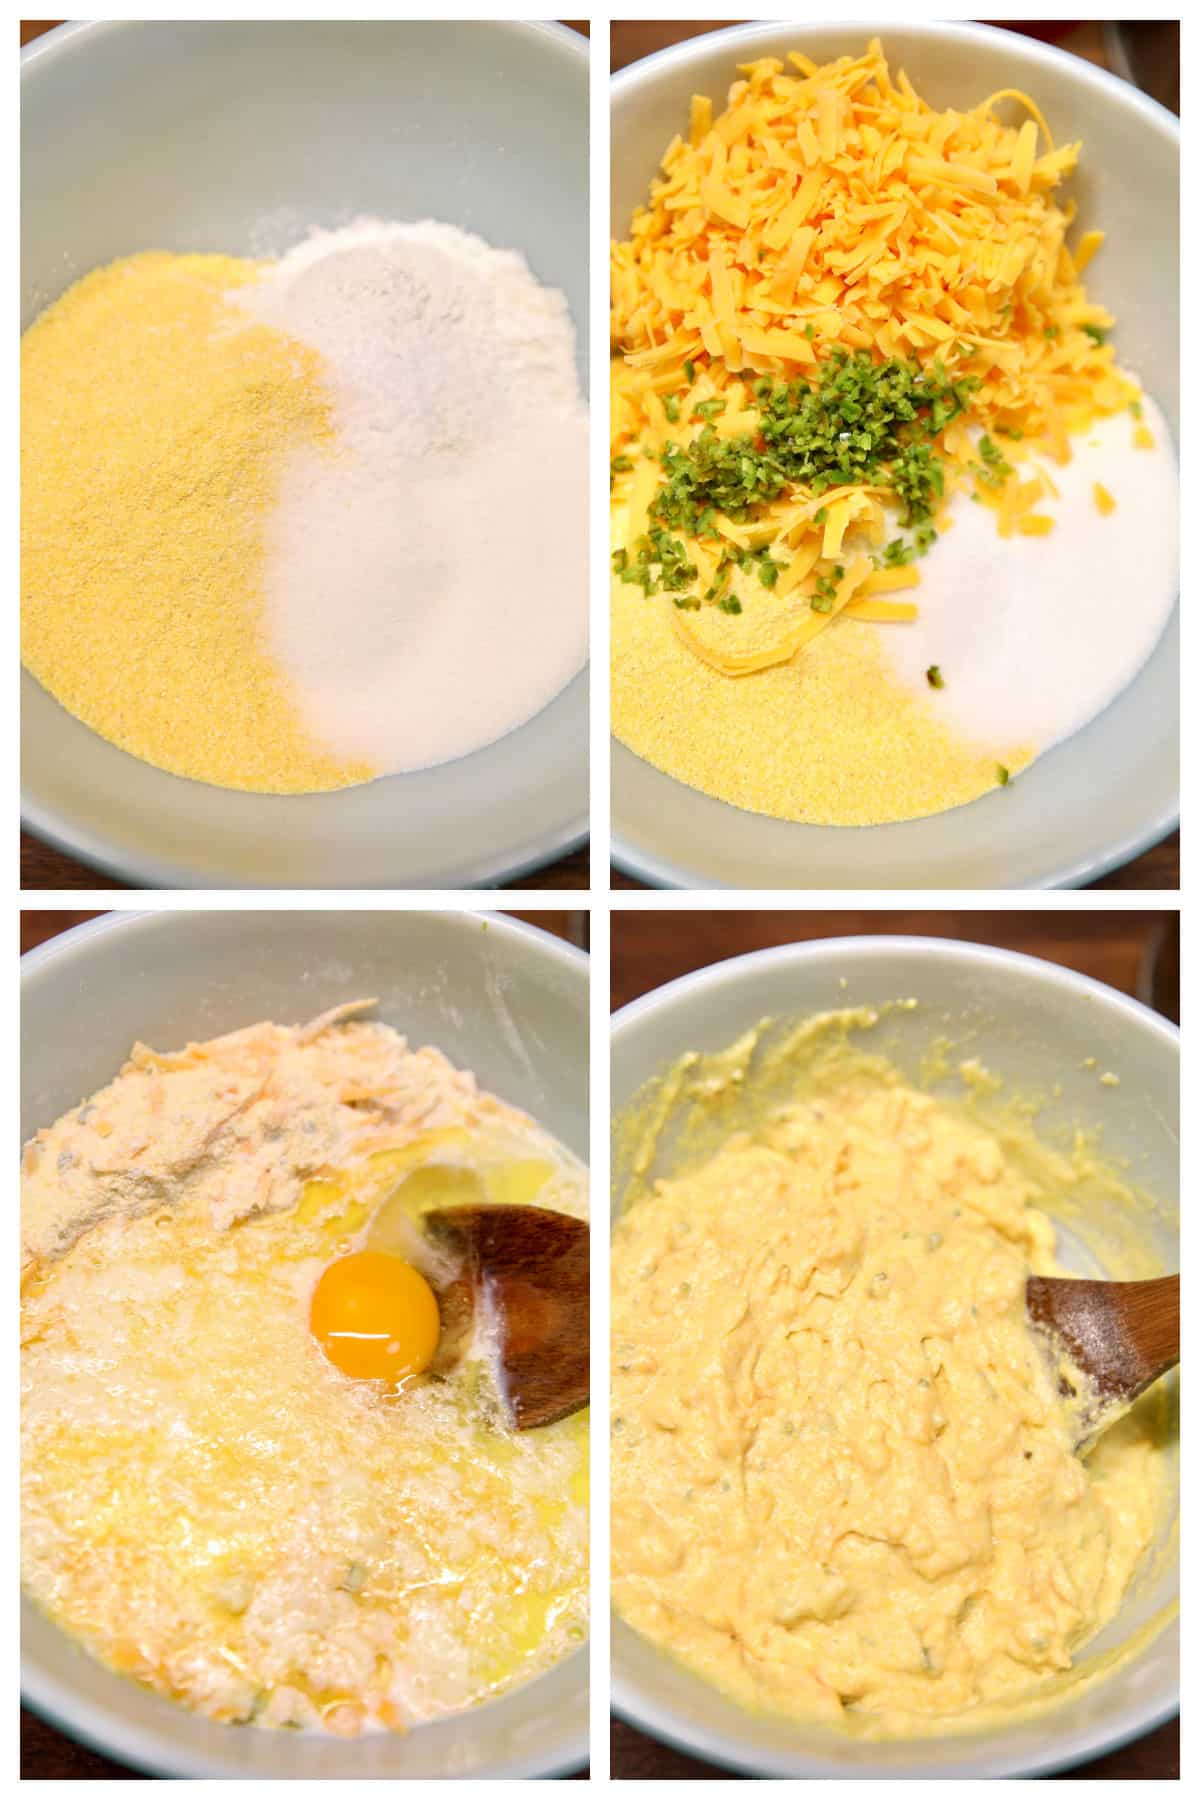 Collage making cornbread batter with jalapeno and cheddar.